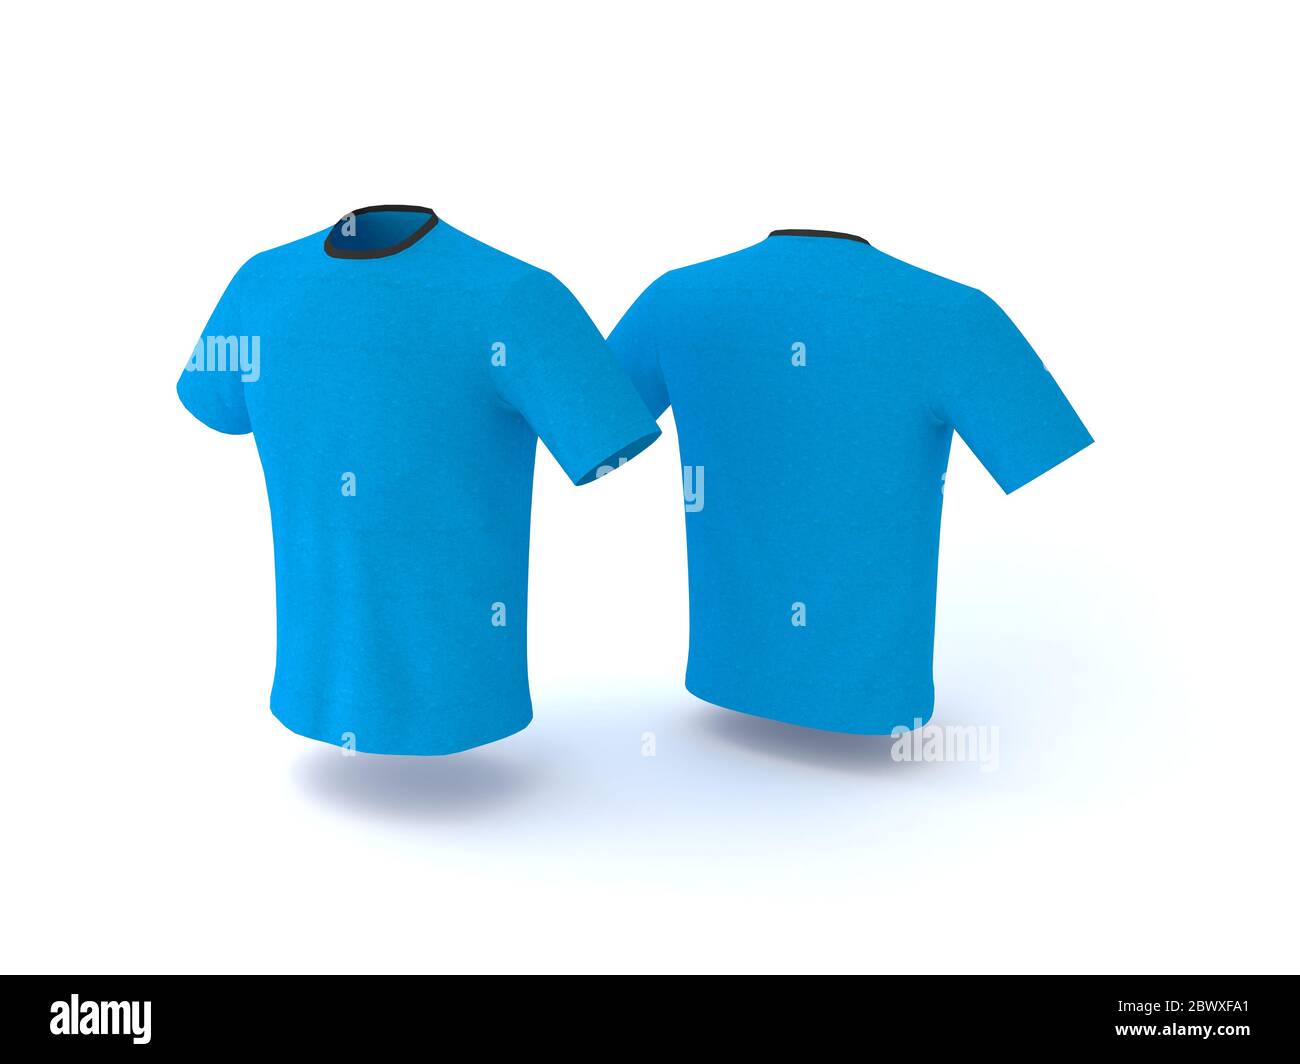 Blue T-shirt template, isolated on background. Men's realistic T